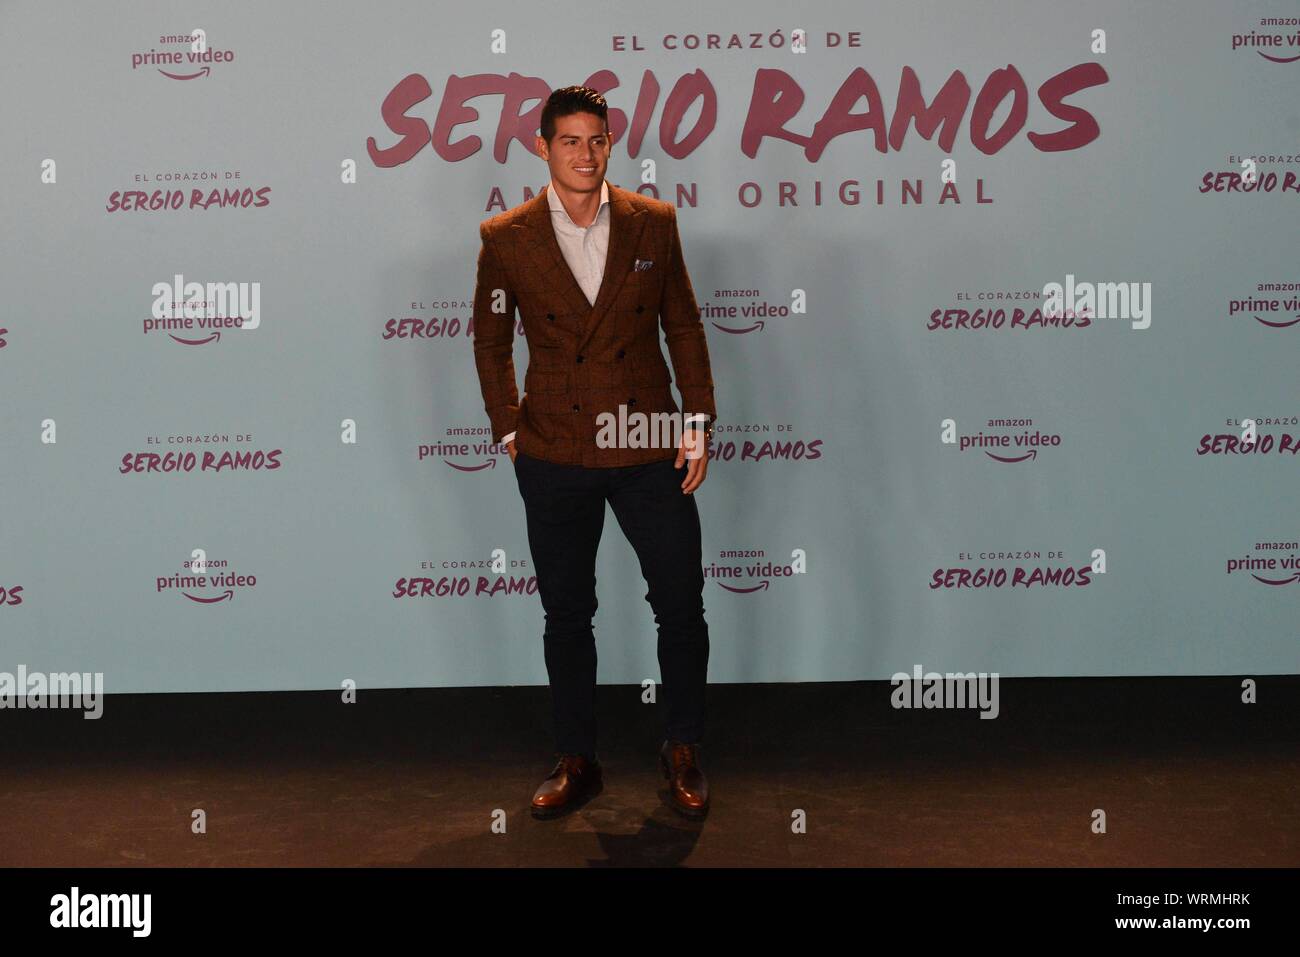 Madrid, Spain. 10th Sep, 2019. JAMES RODRIGUEZ DURING AT PHOTOCALL FOR  PREMIERE DOCUMENTARY FILM "EL CORAZON